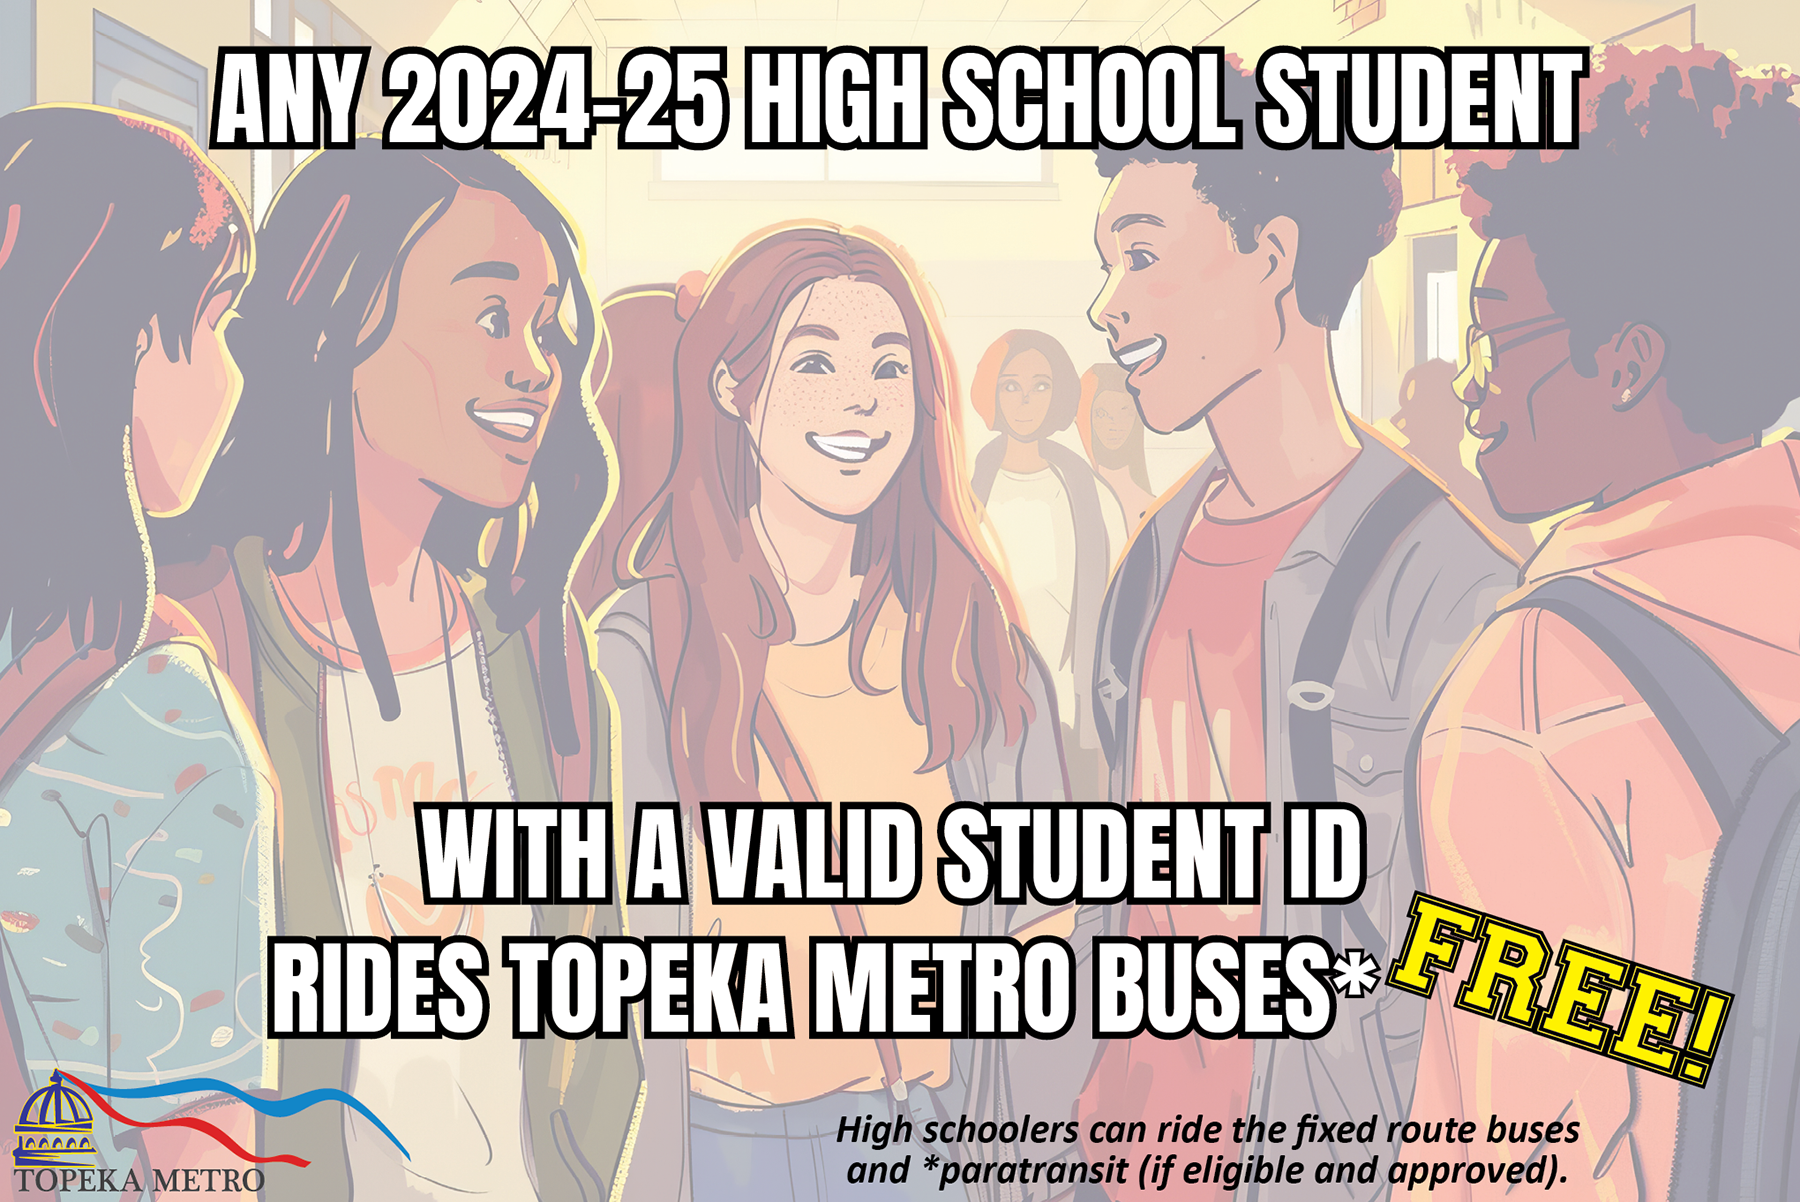 All high school students ride free with valid student ID